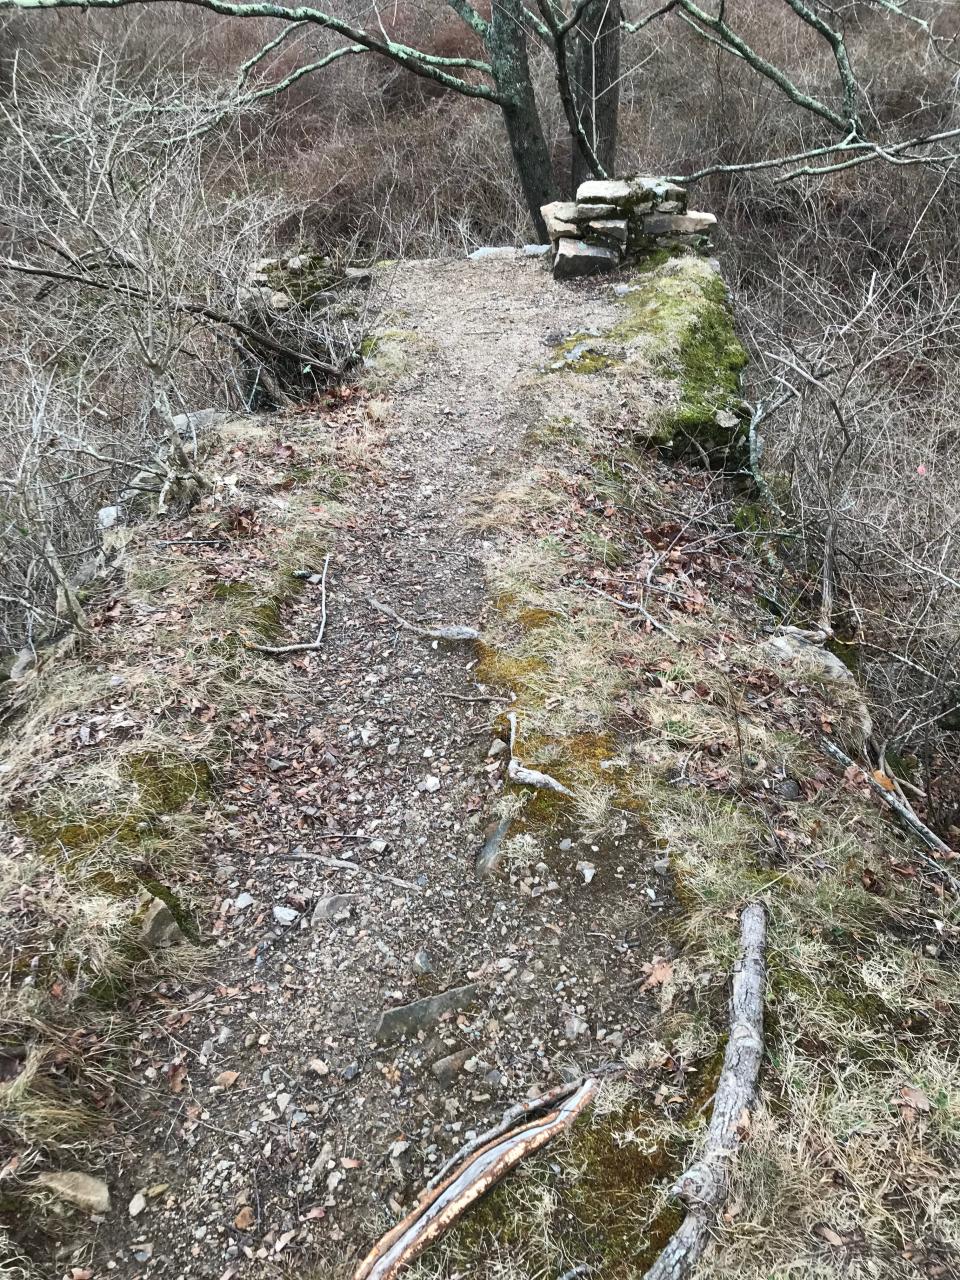 An earthen and stone bridge is all that remains from the site of a stone-crushing machine used to quarry granite.